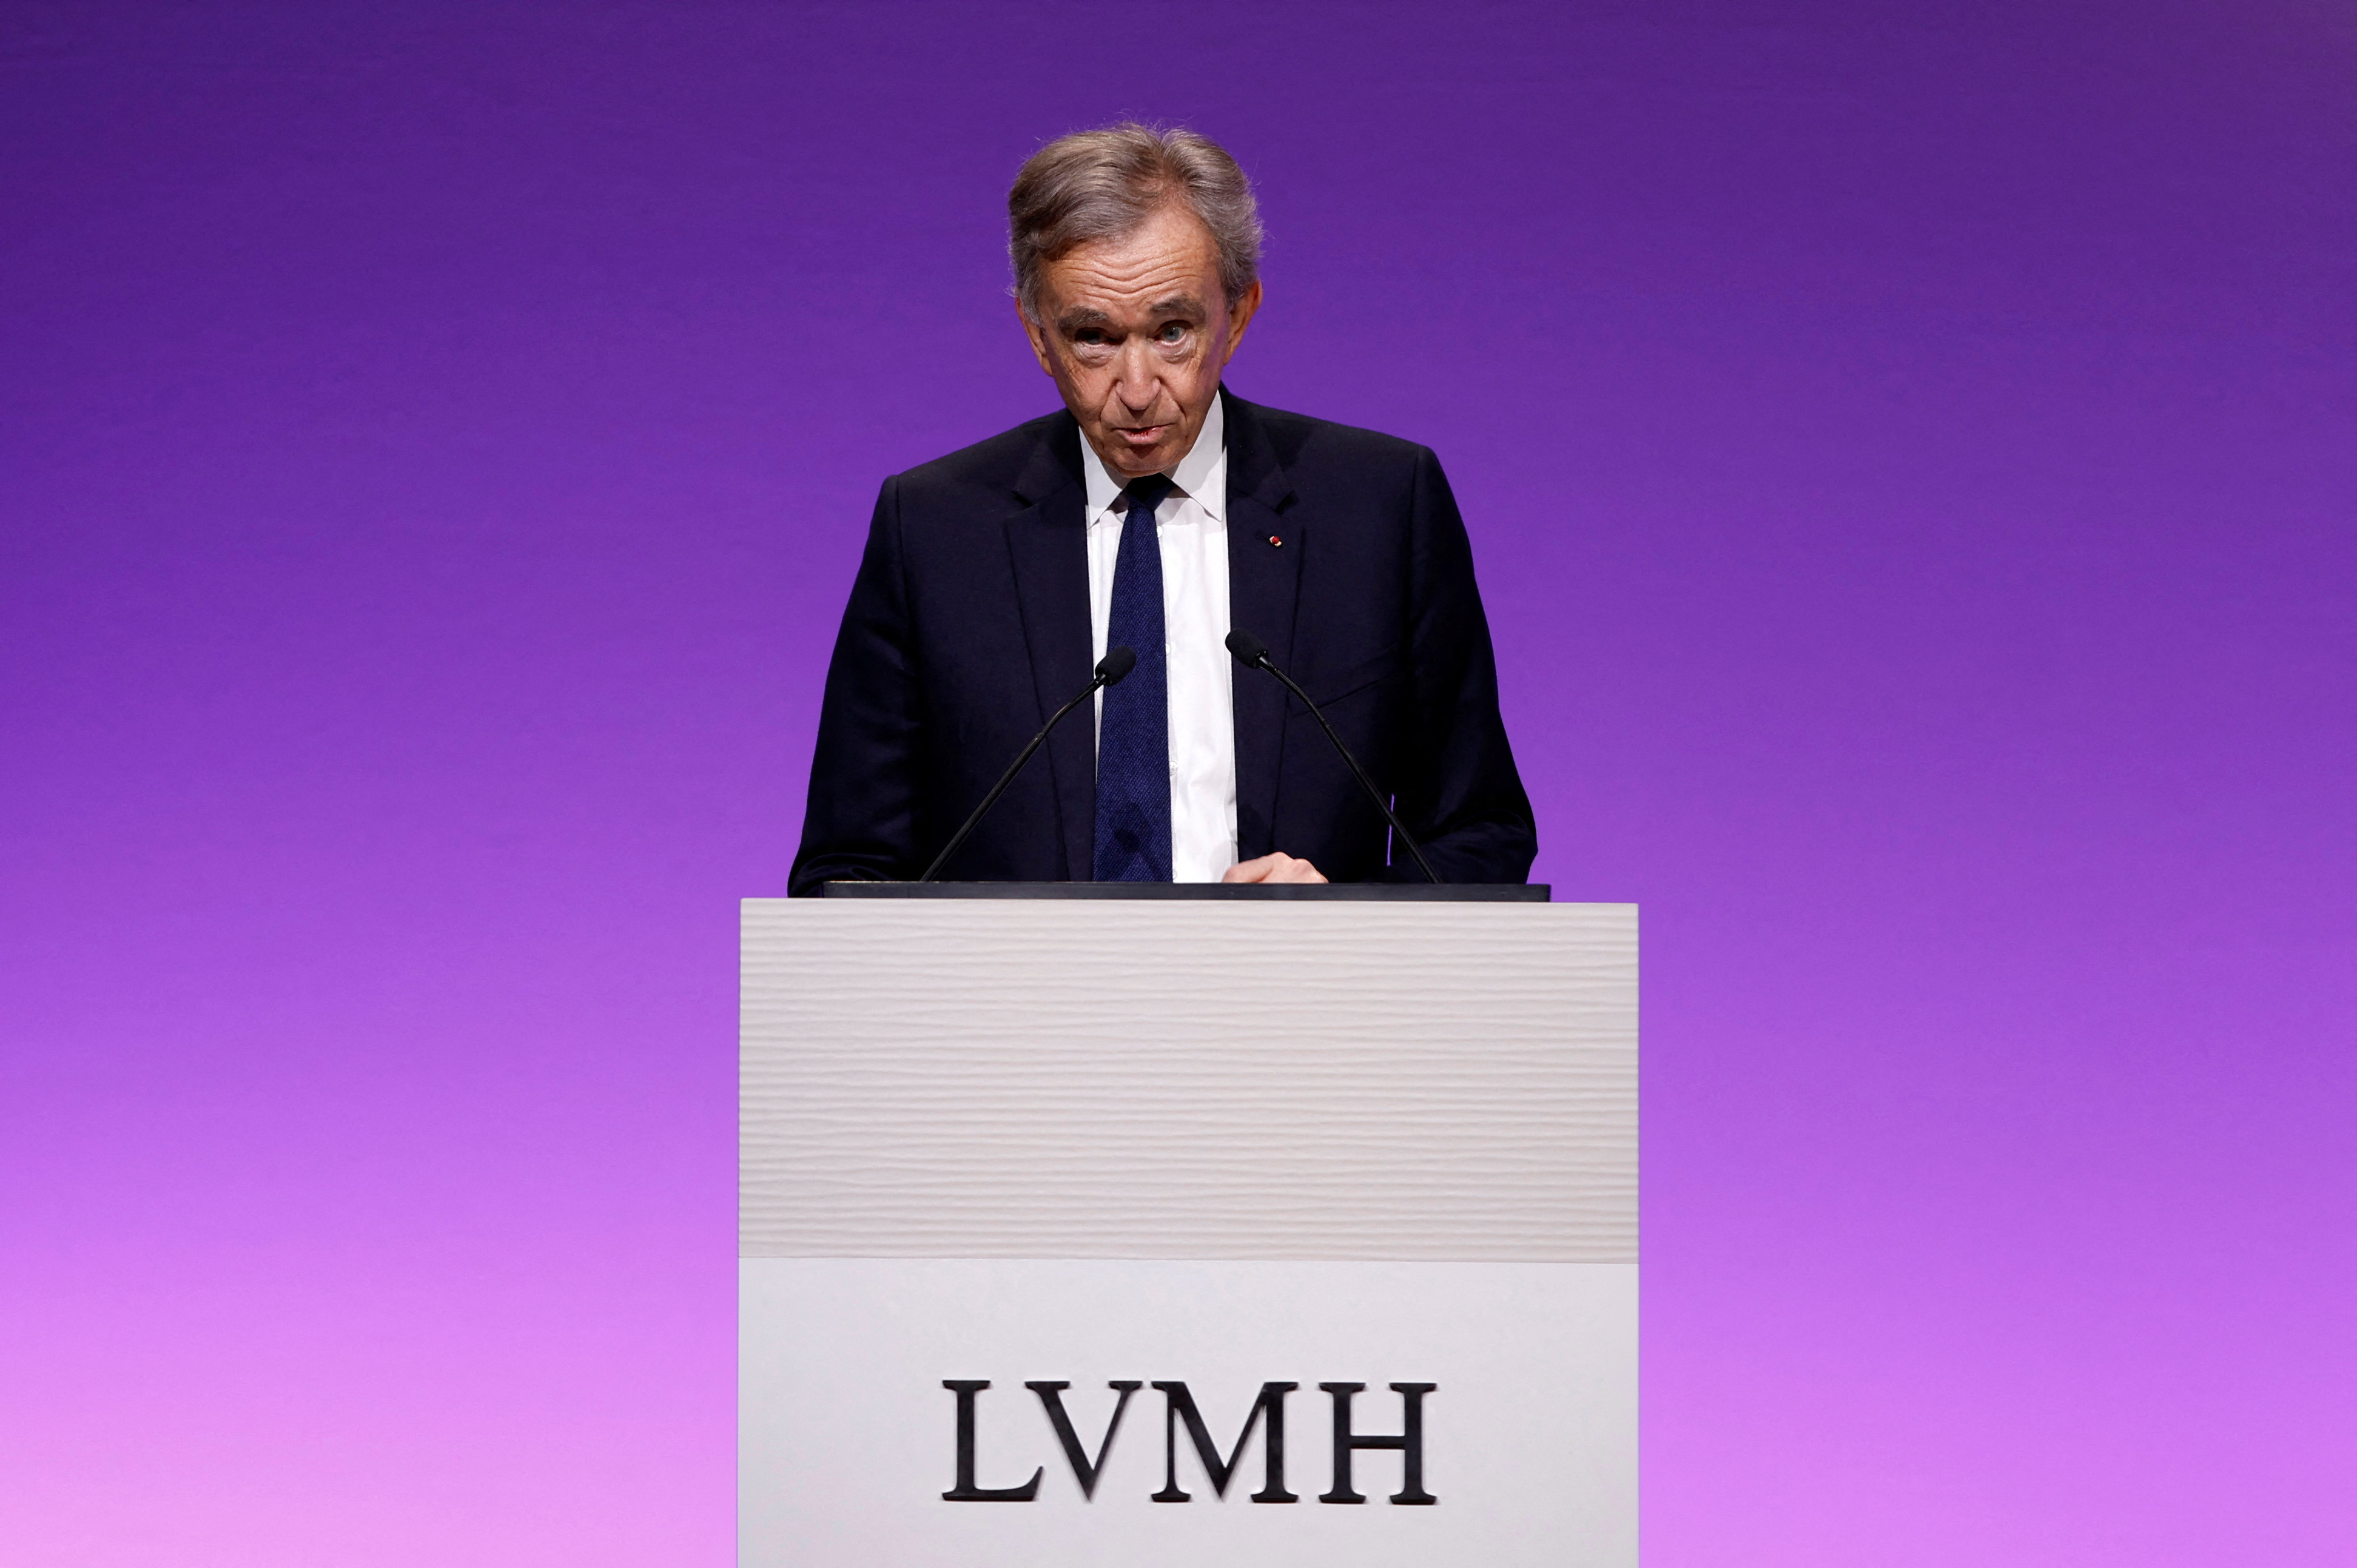 LVMH Louis Vuitton growth continues at rapid pace, revenue up 46% - Spinoso  Real Estate Group